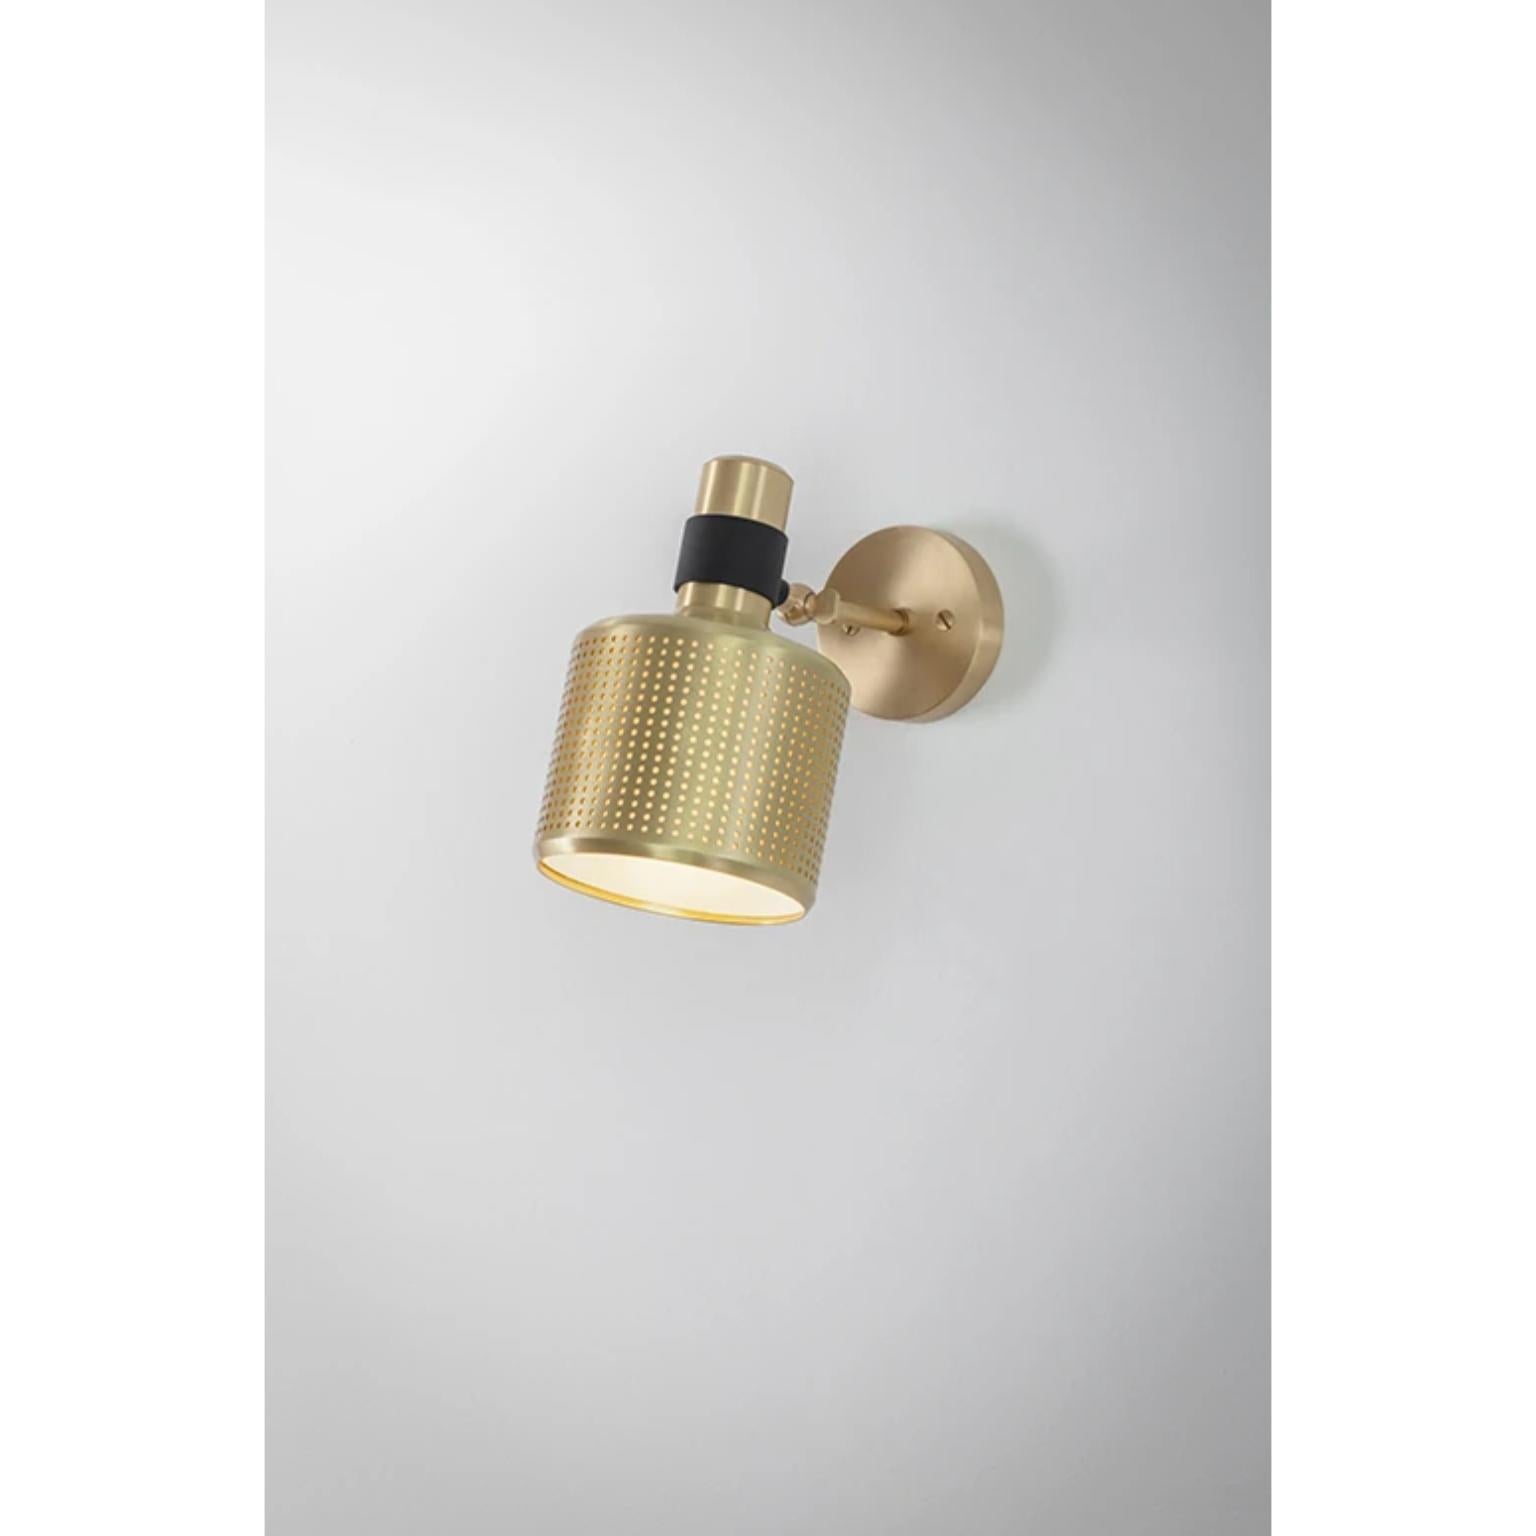 Single Riddle wall lamp by Bert Frank
Dimensions: H 19 x 12 x 18 cm
Materials: Brass 

Available finishes: Brass and black
All our lamps can be wired according to each country. If sold to the USA it will be wired for the USA for